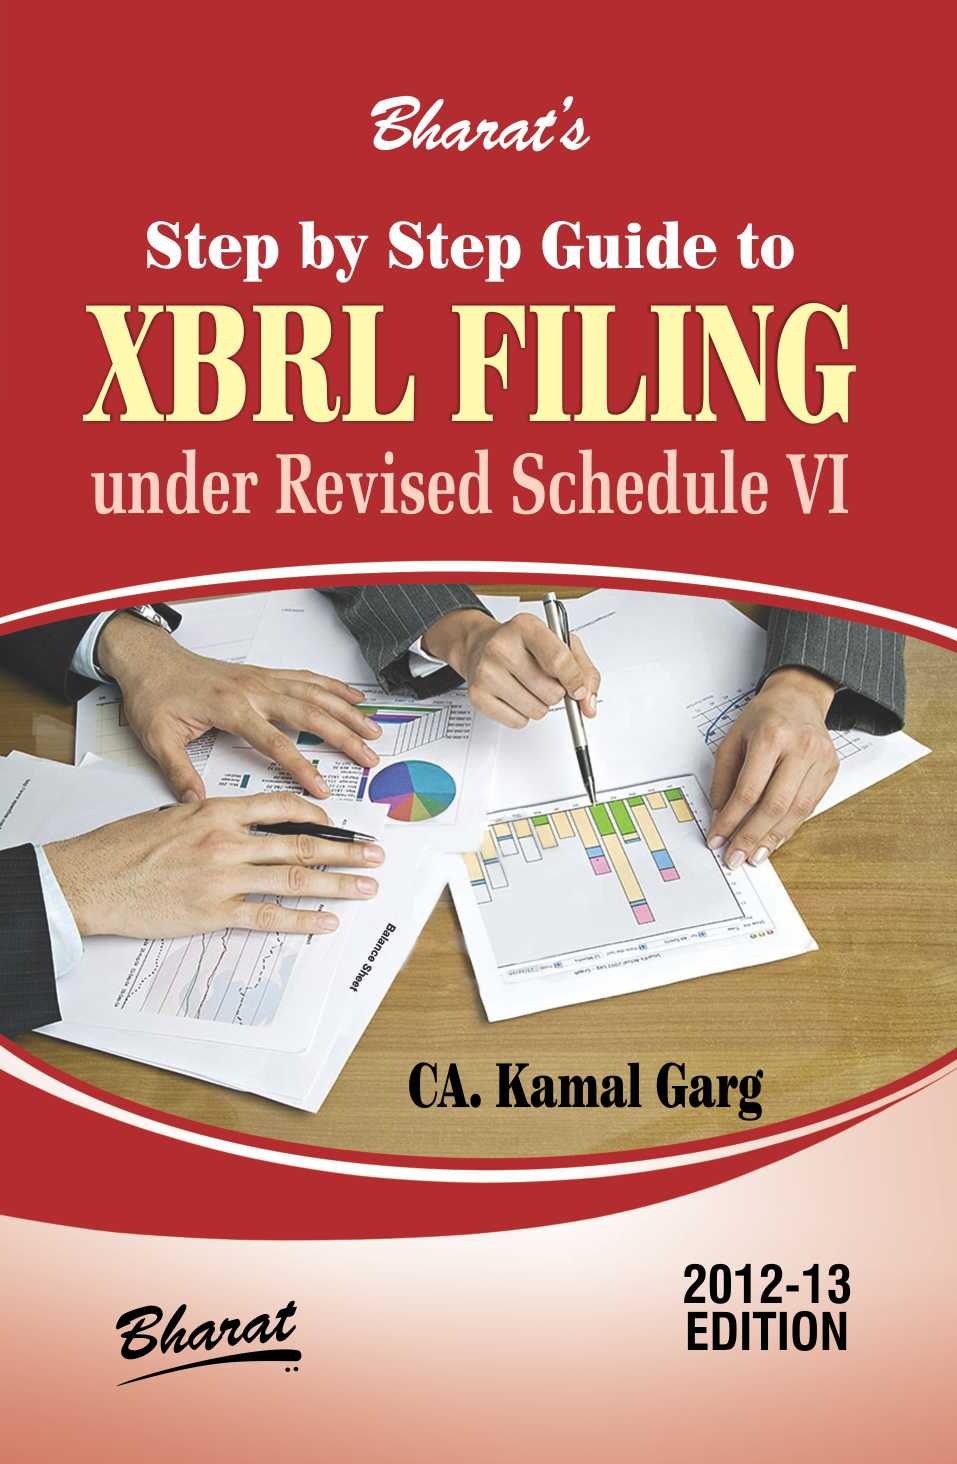 Step by Step Guide to X B R L FILING under Revised Schedule VI